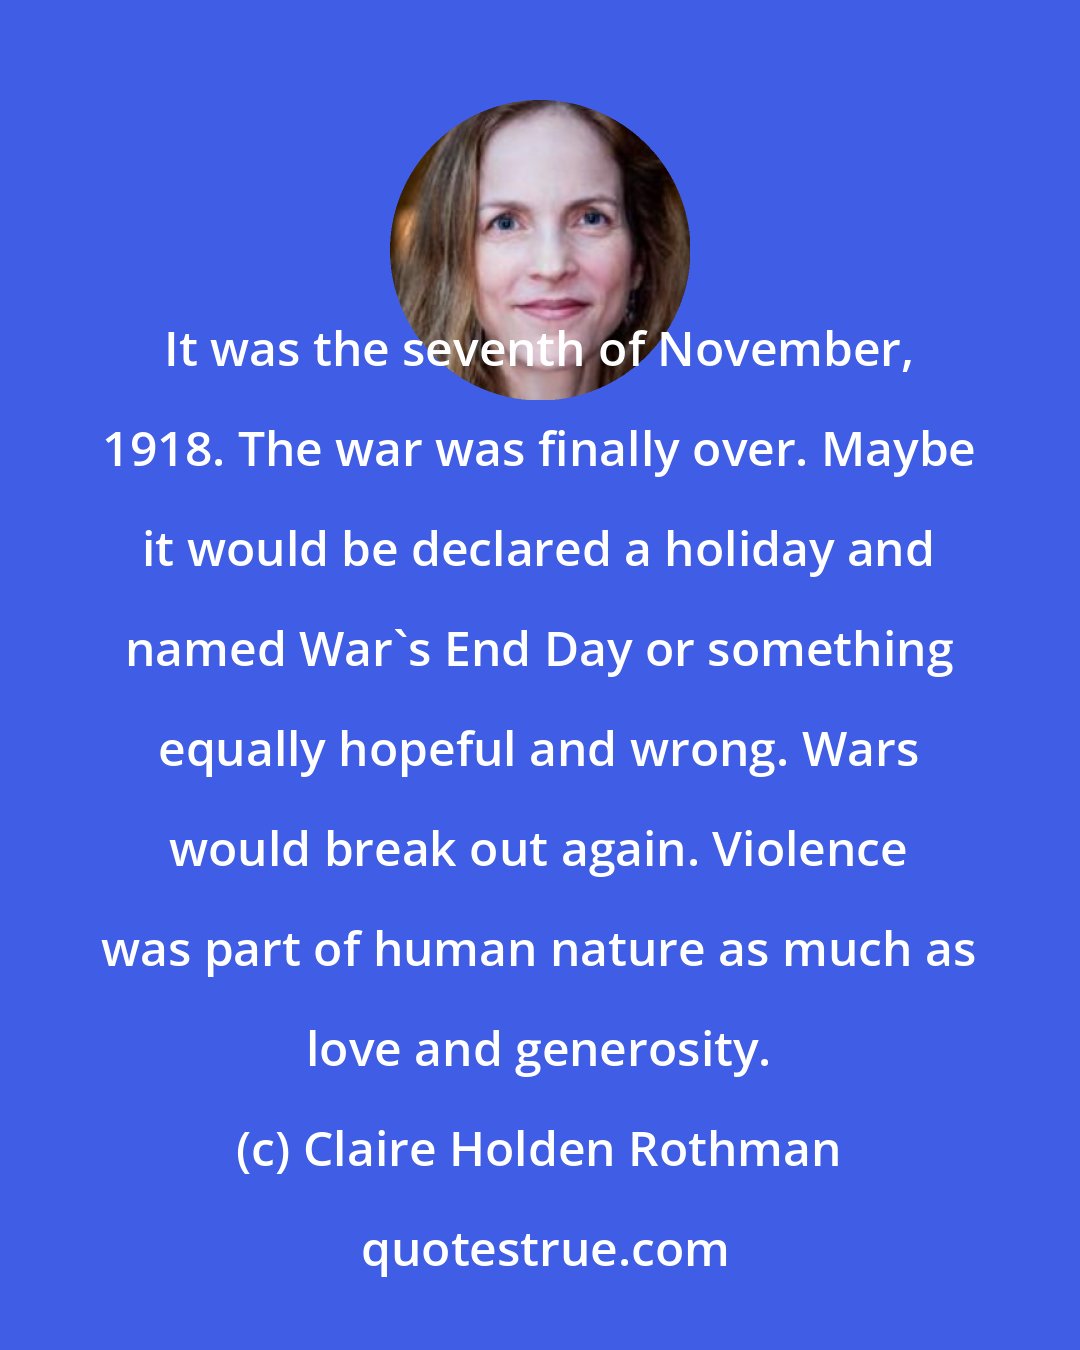 Claire Holden Rothman: It was the seventh of November, 1918. The war was finally over. Maybe it would be declared a holiday and named War's End Day or something equally hopeful and wrong. Wars would break out again. Violence was part of human nature as much as love and generosity.